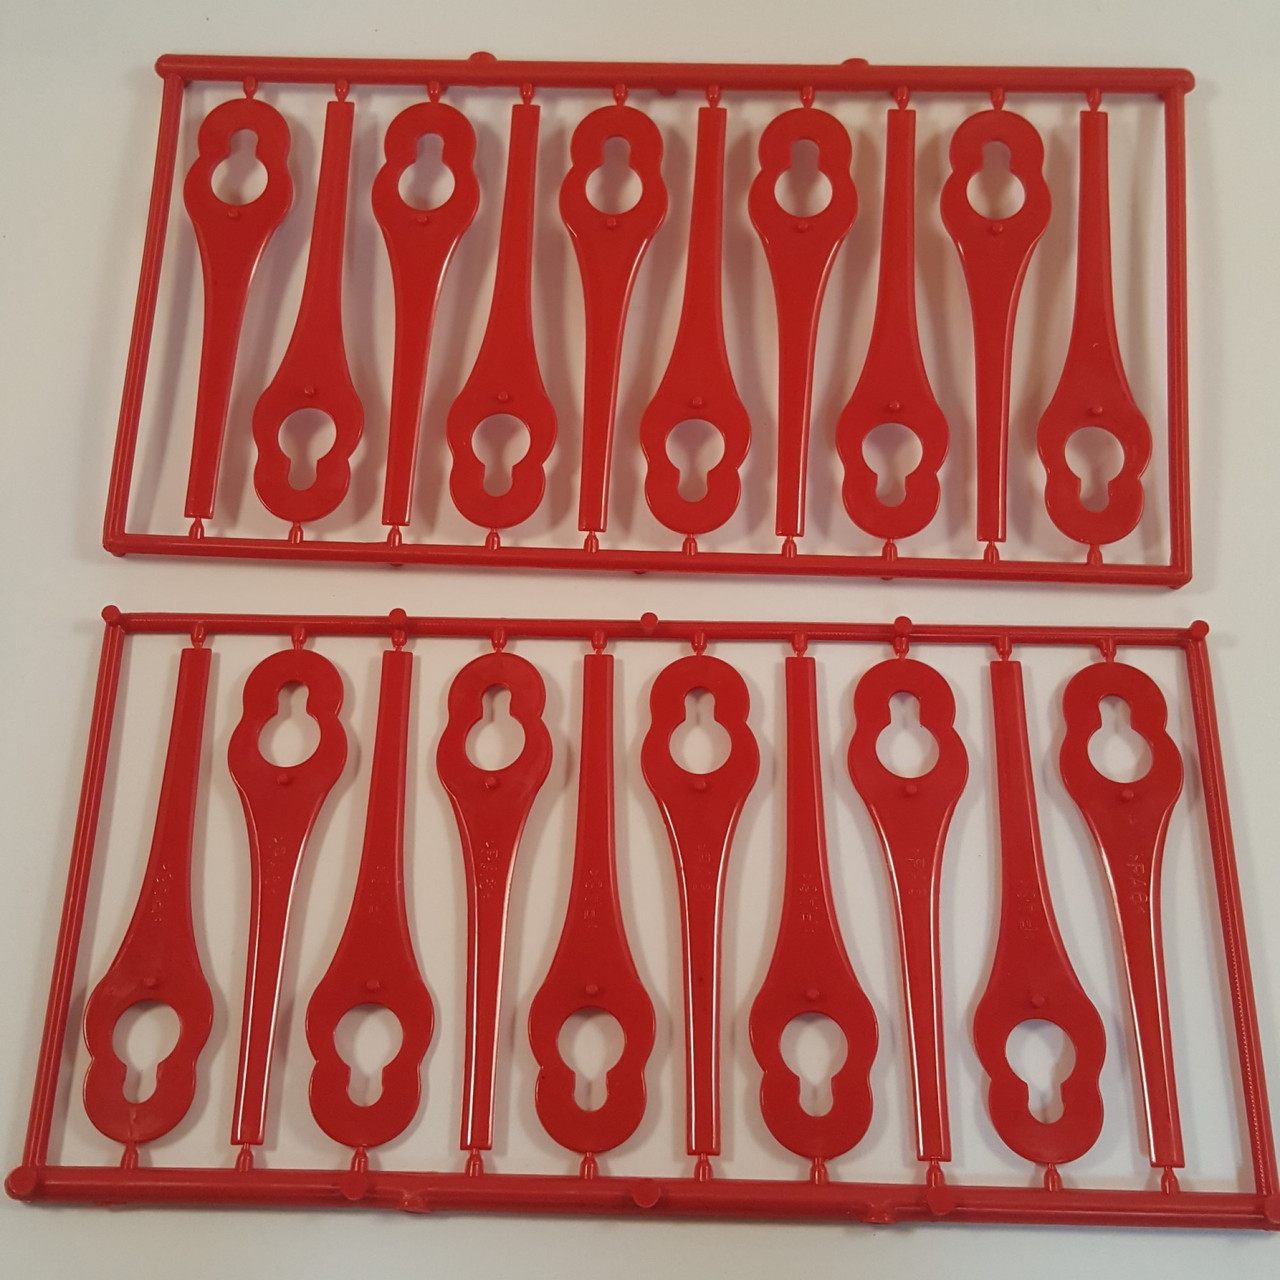 Plastic Blade/Cutting insters (20pcs)